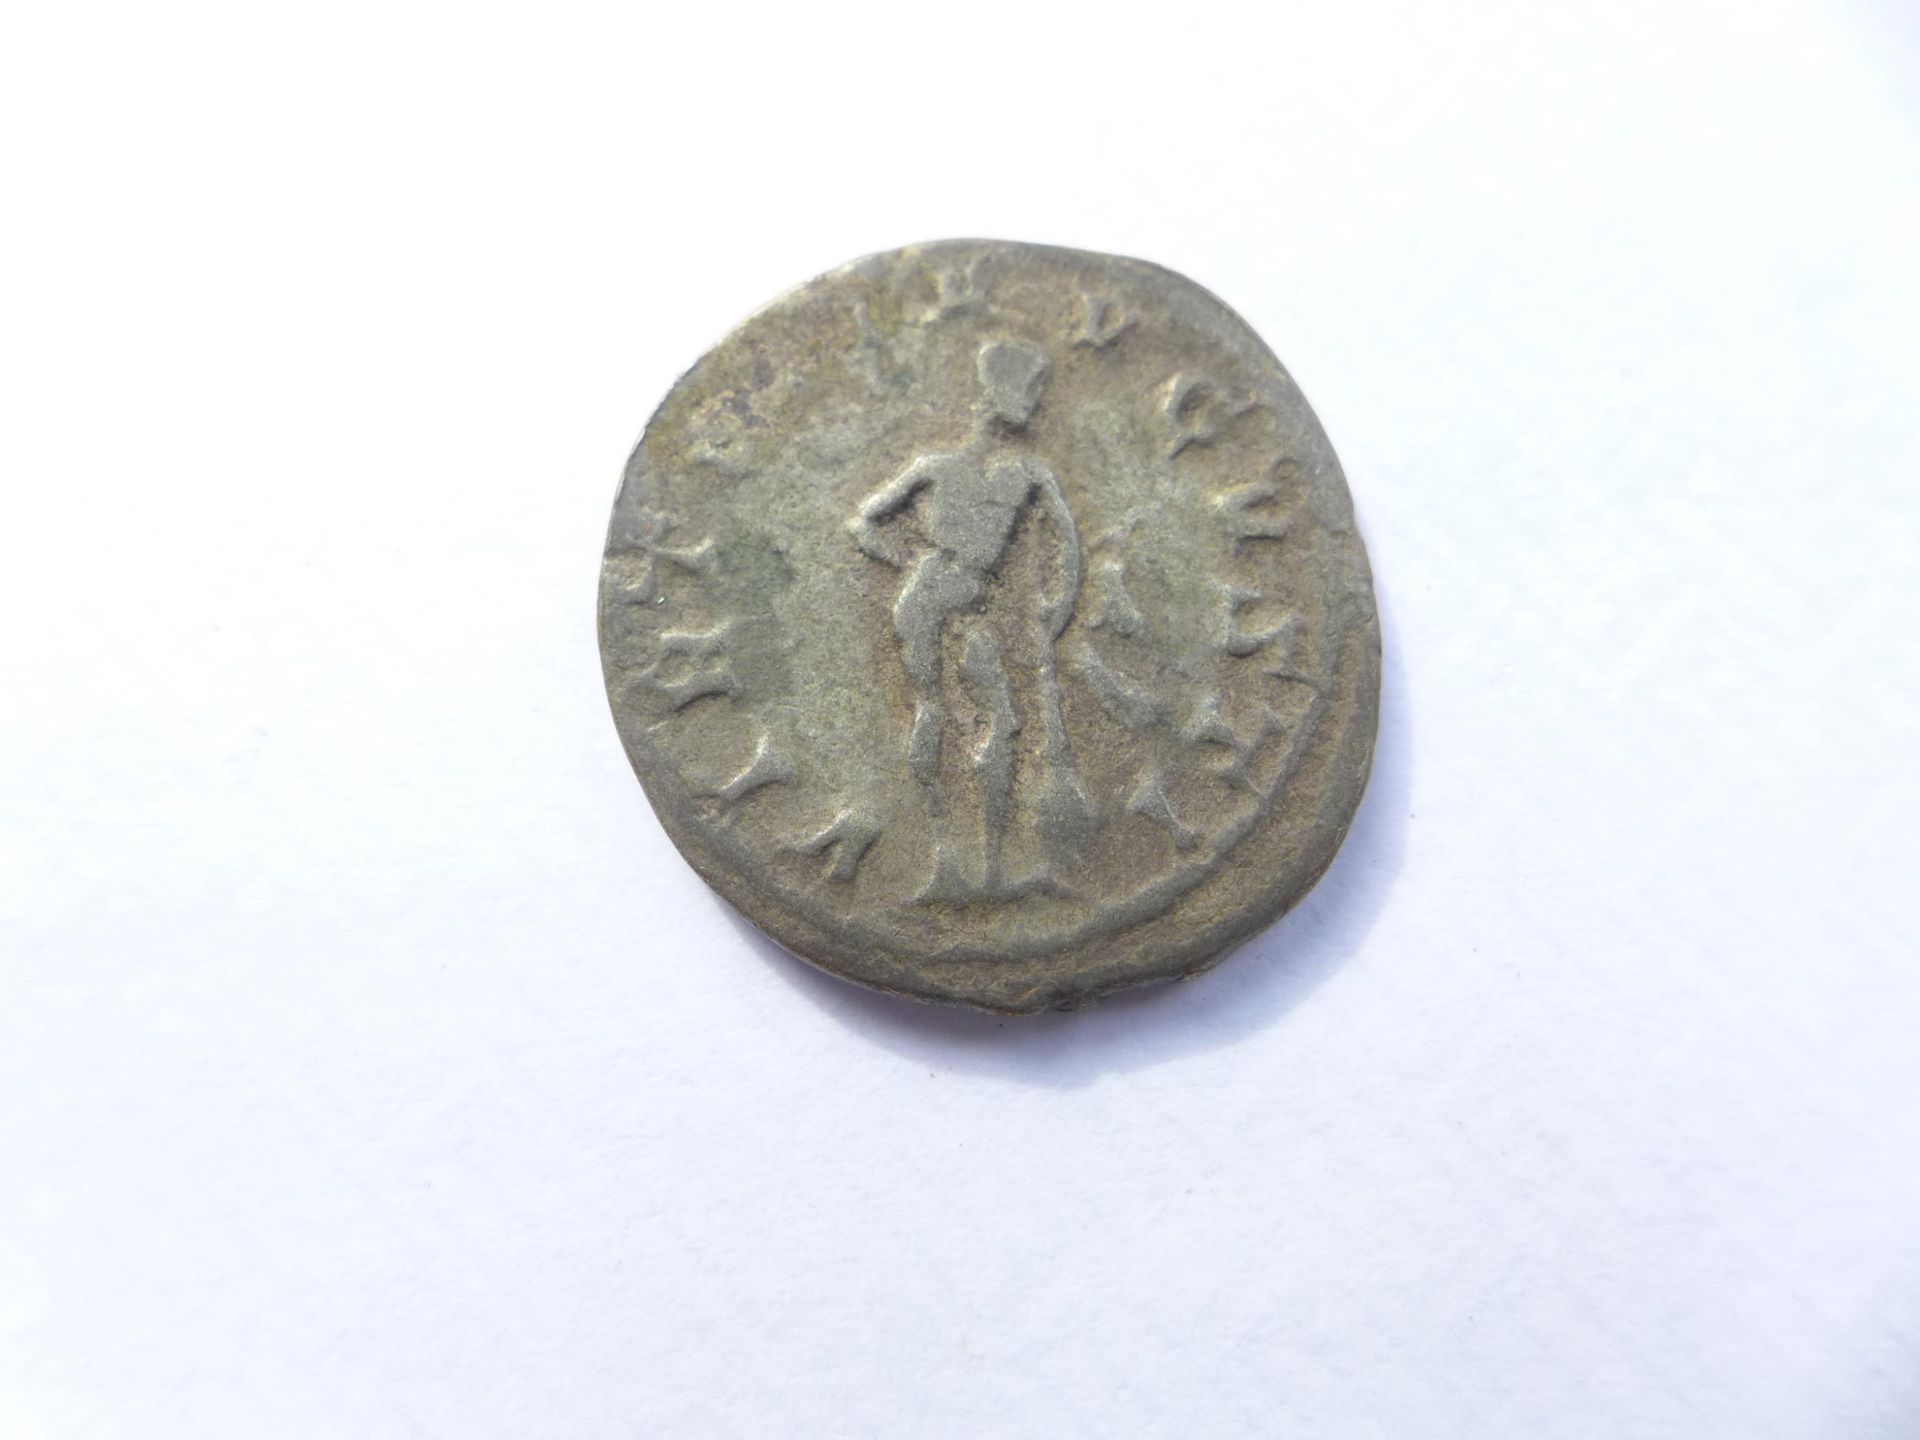 A GORDIAN III (238-244 AD) SILVER ANTONIANUS AND A SMALL METAL BEAD - Image 3 of 3